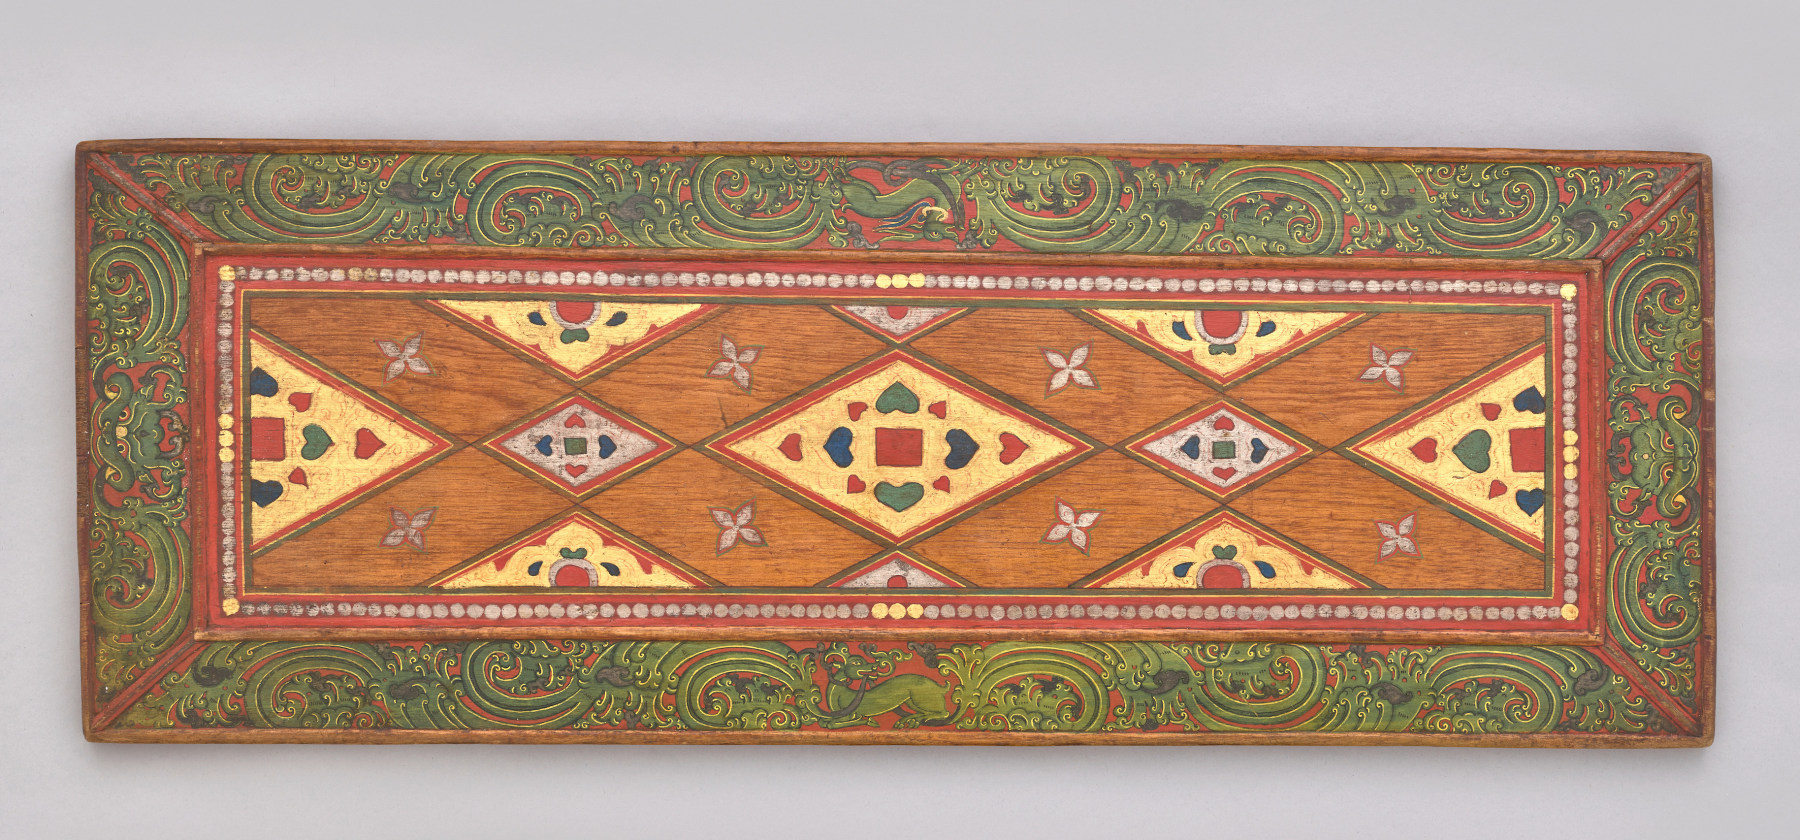 Carved wood and polychrome book cover with jewel-encrusted shapes and flowing scroll work on the edges